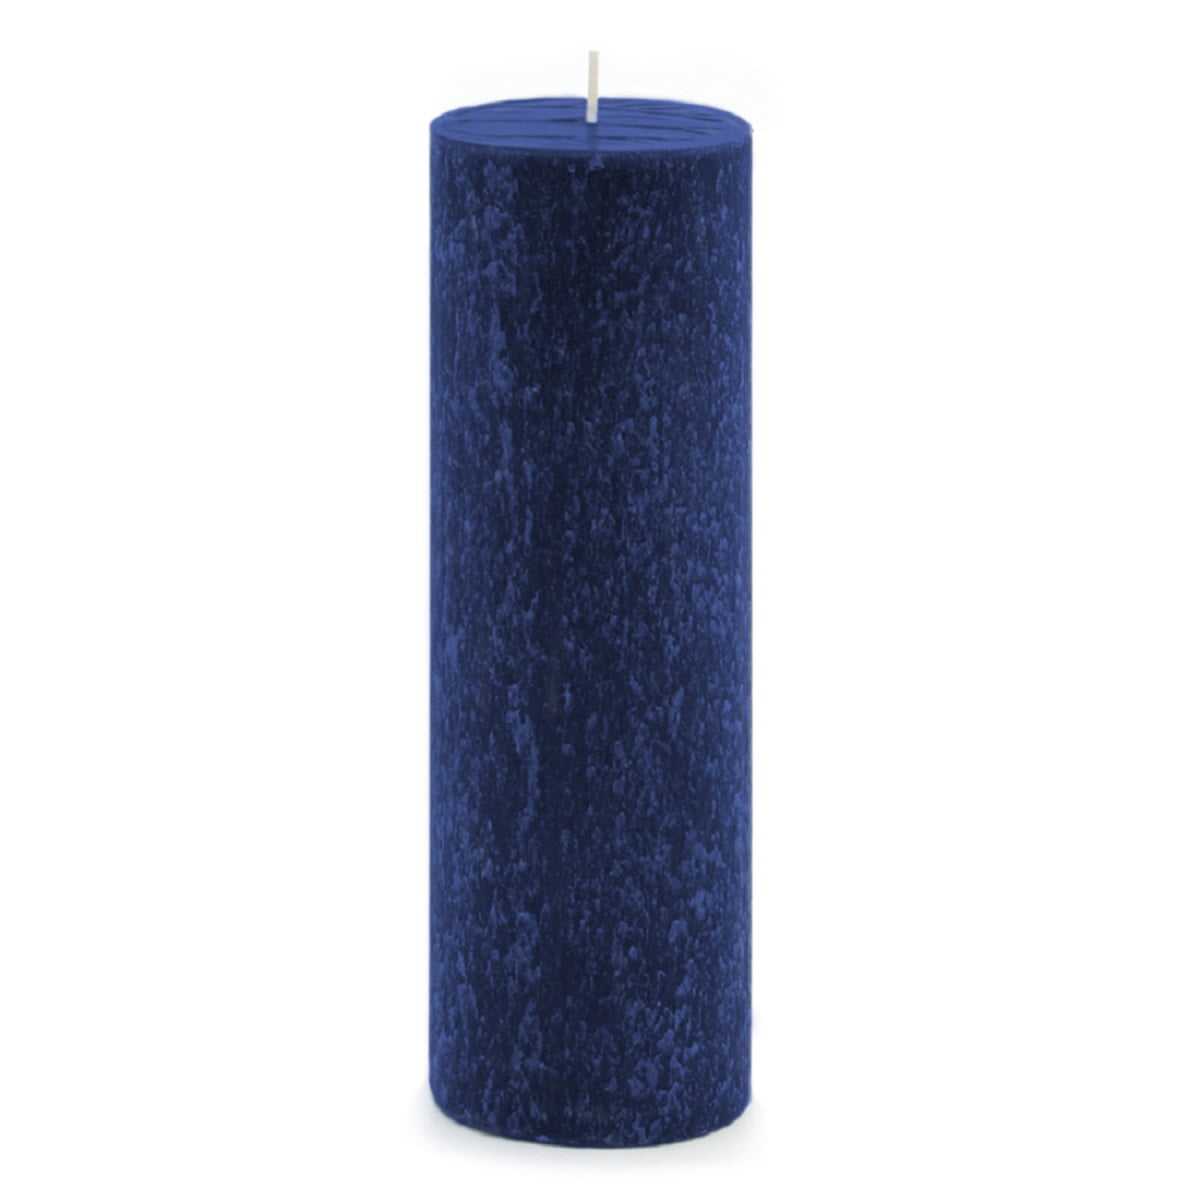 Platinum 3 x 9-Inches Root Candles Unscented Timberline Pillar Candle 